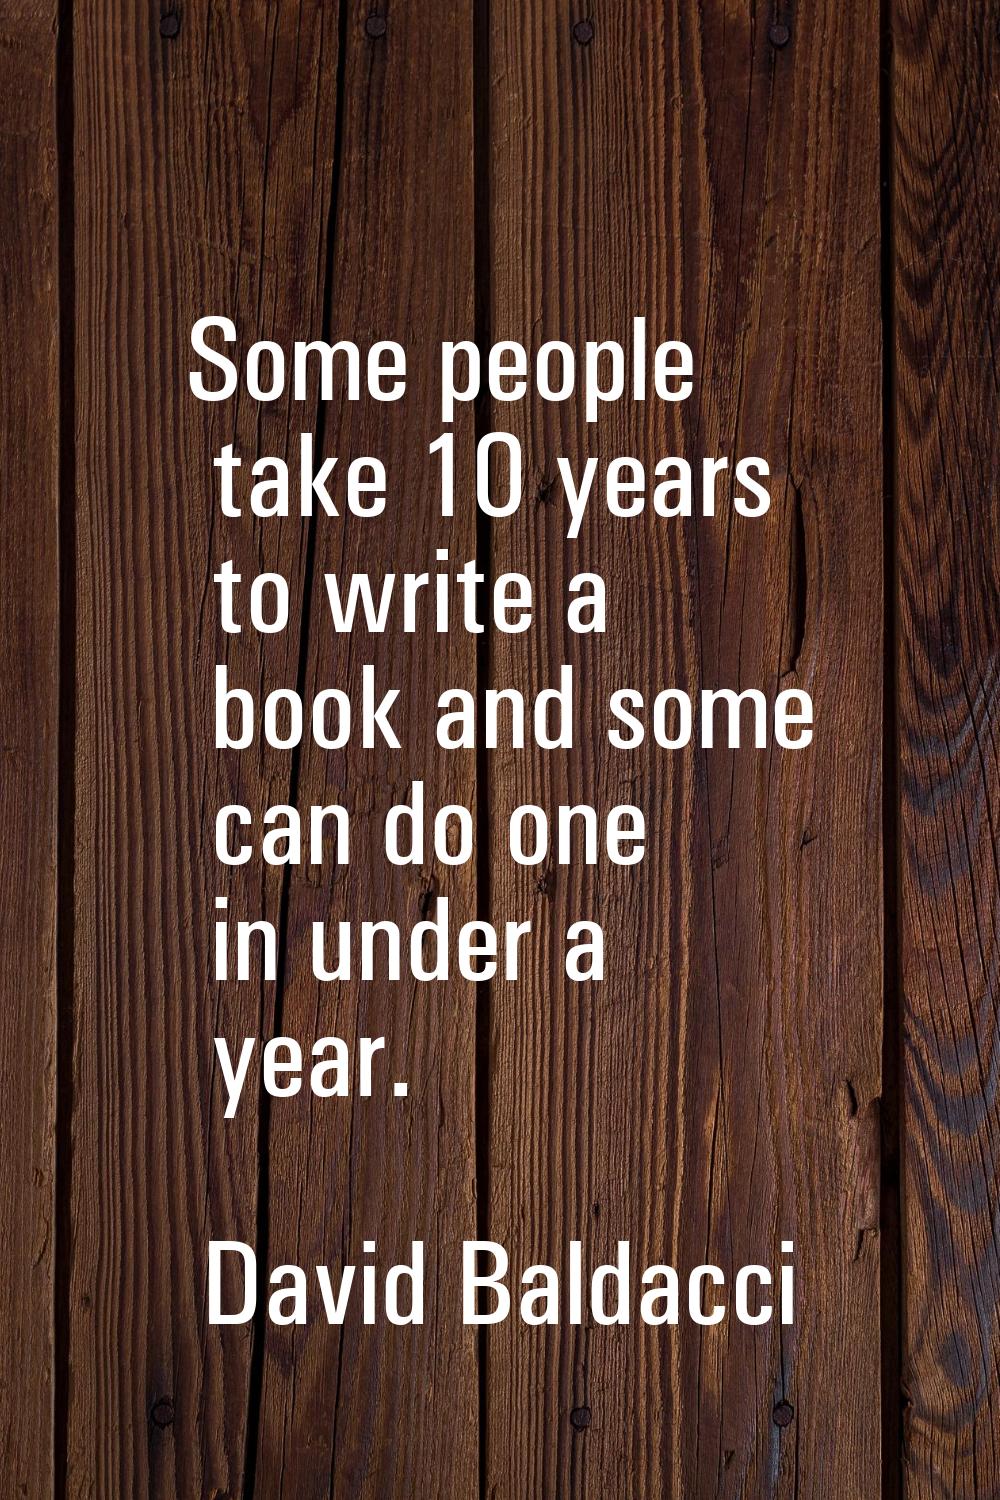 Some people take 10 years to write a book and some can do one in under a year.